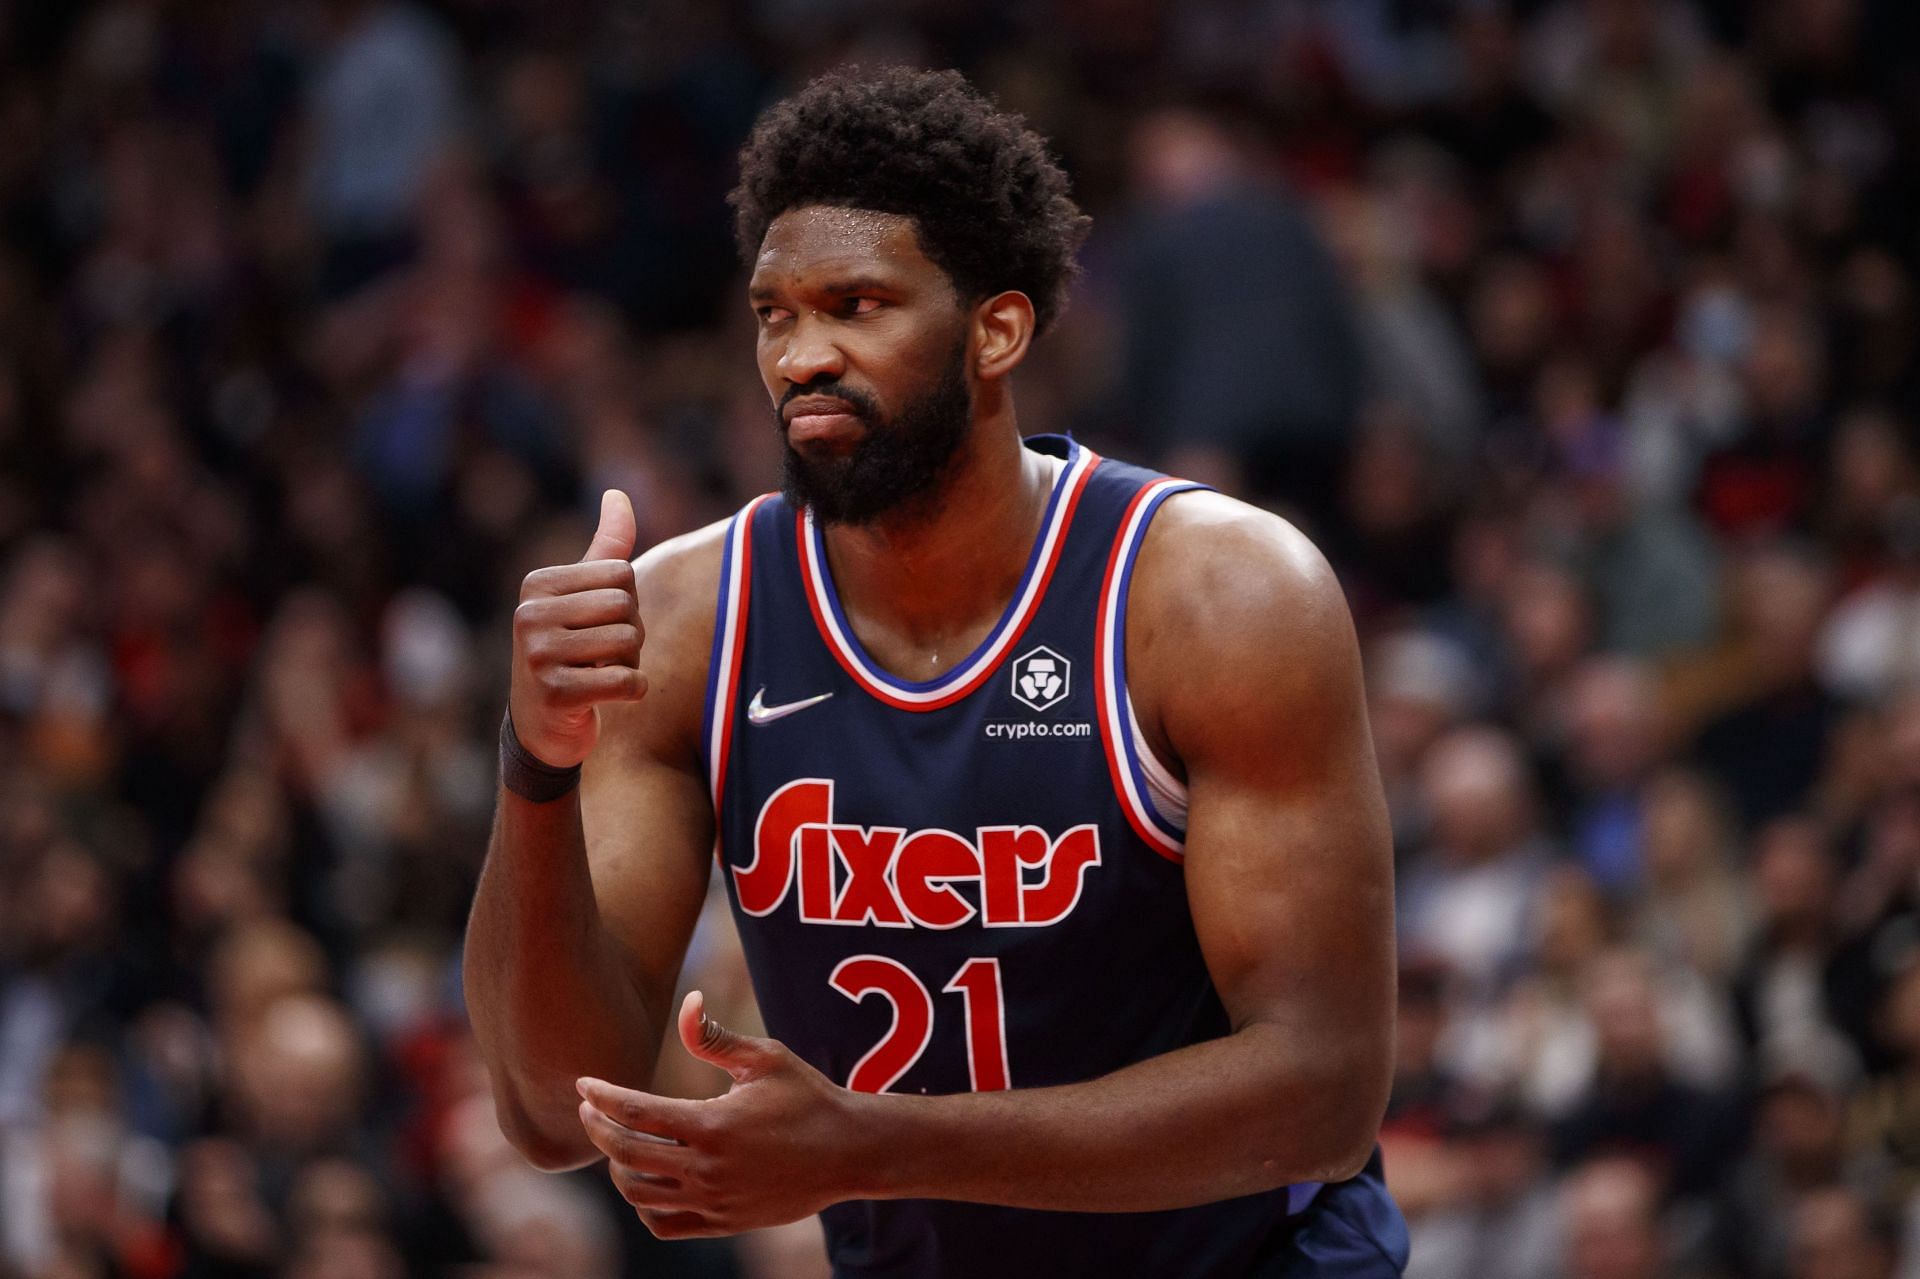 Joel Embiid missed his first two years in the league due to a foot injury.